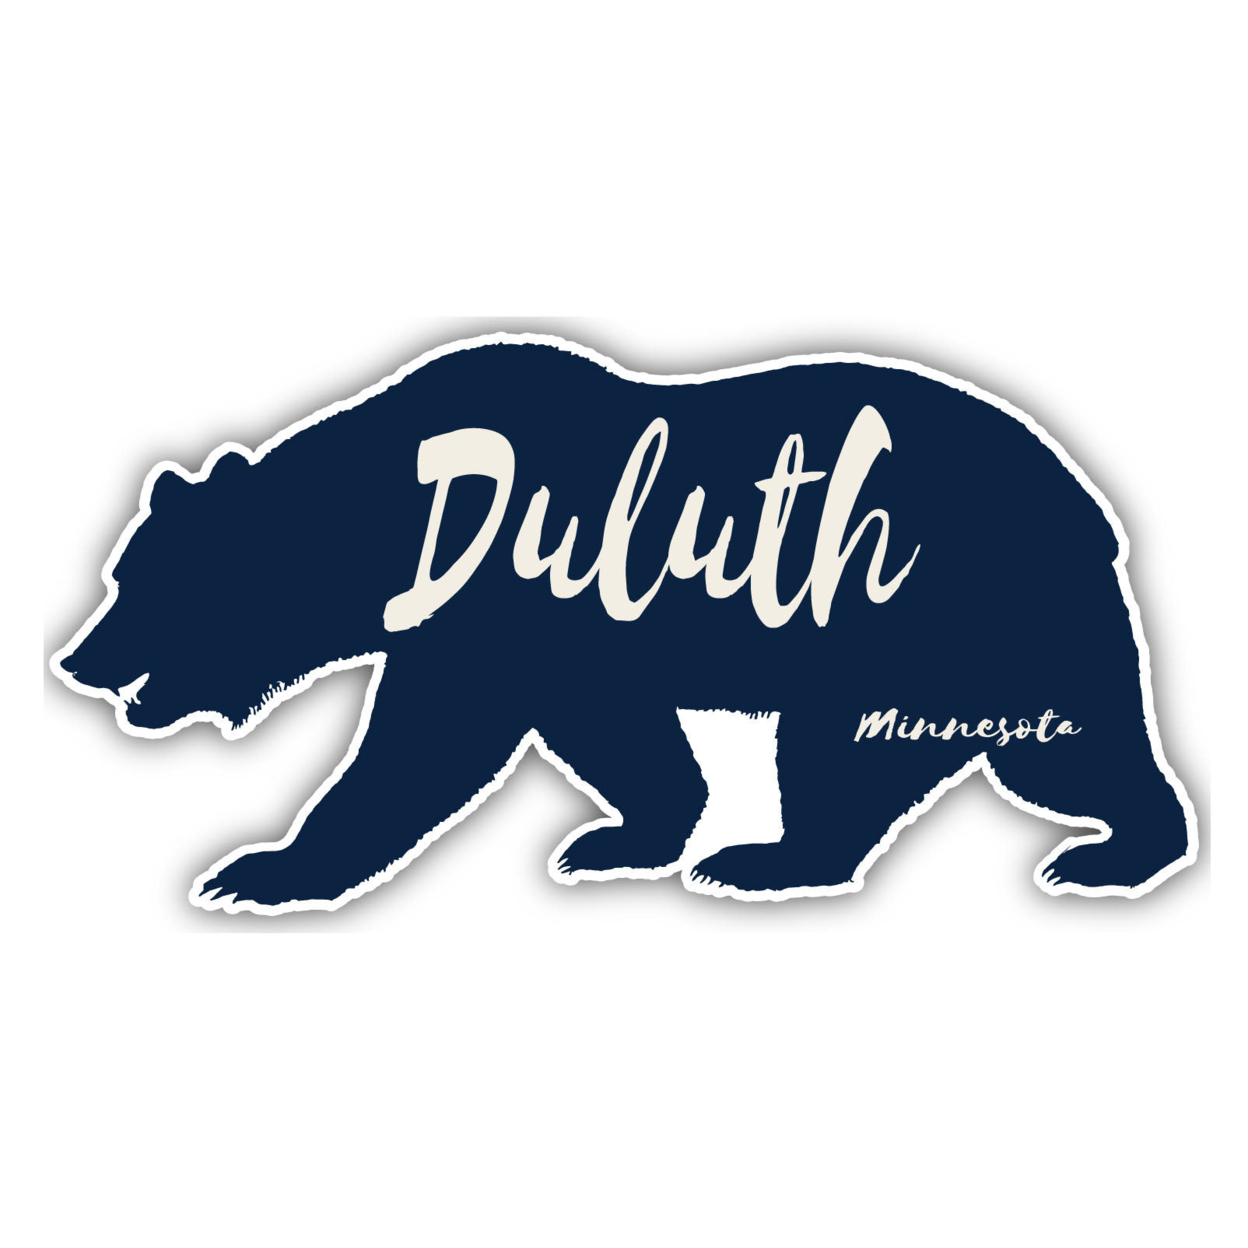 Duluth Minnesota Souvenir Decorative Stickers (Choose Theme And Size) - 4-Pack, 12-Inch, Tent